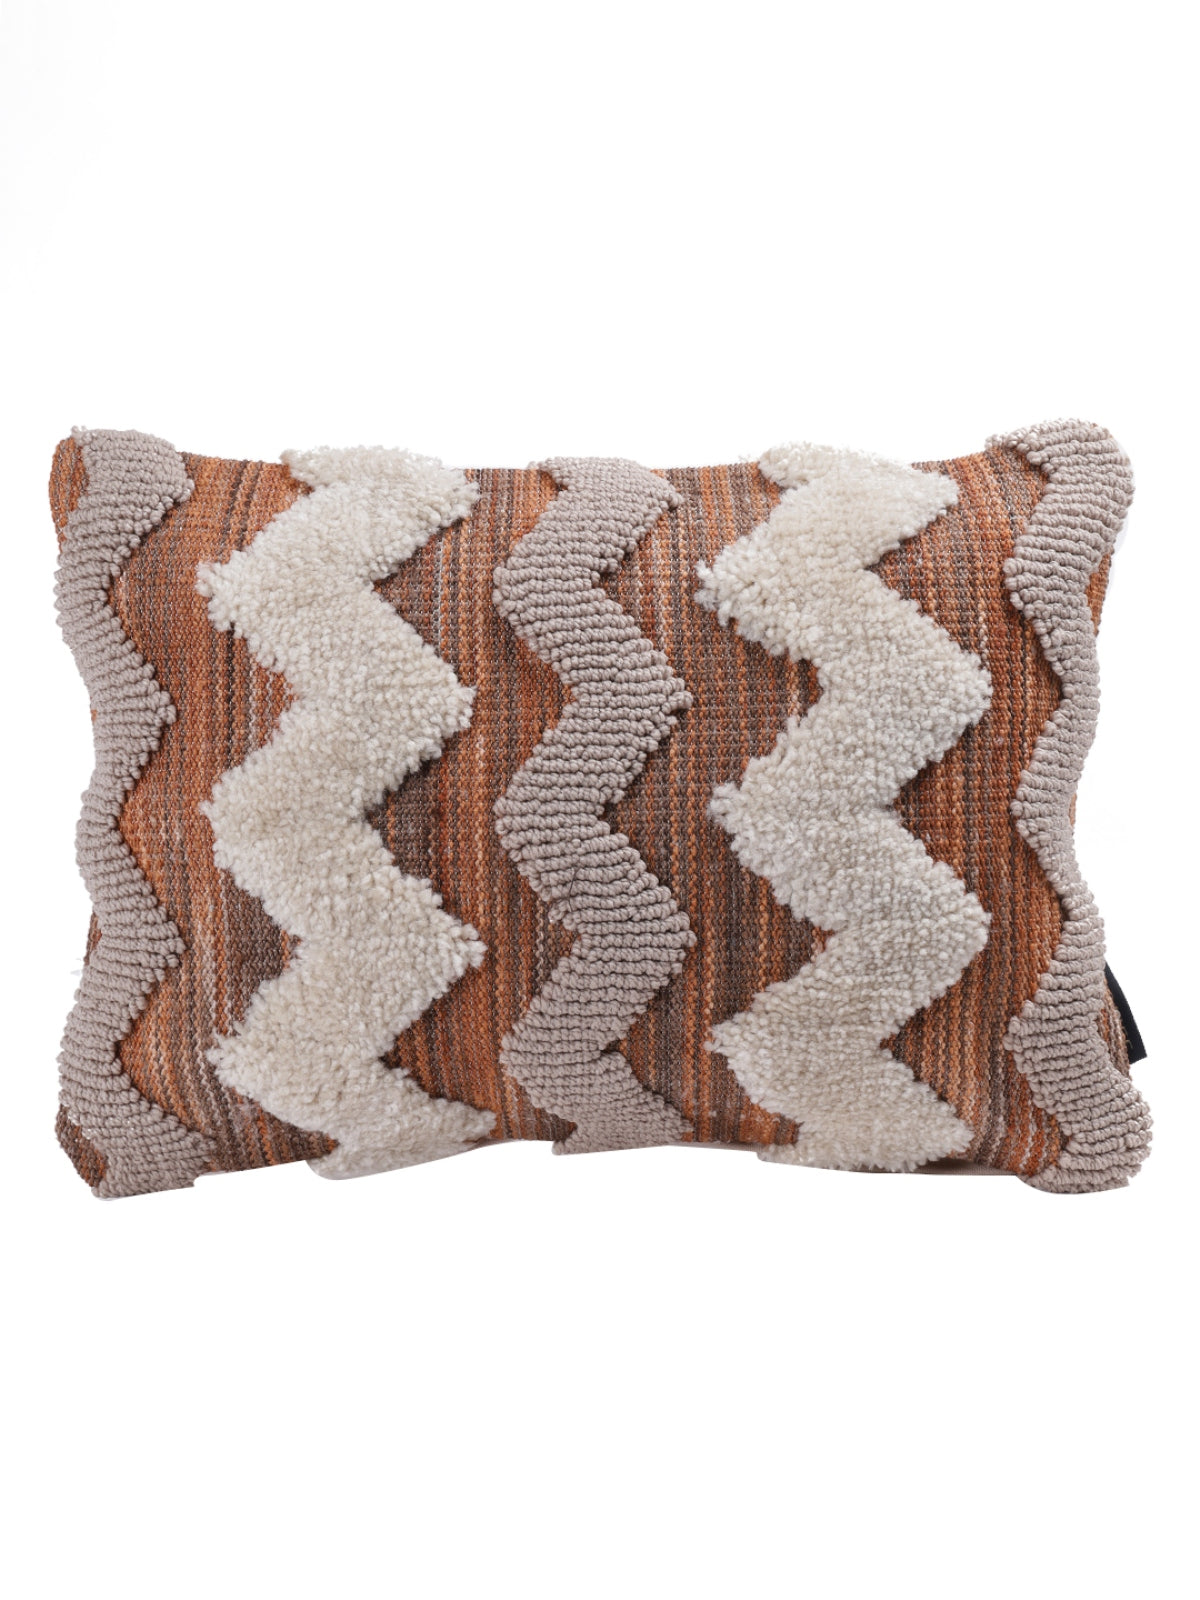 Beige & Brown Set of 2 Cushion Covers